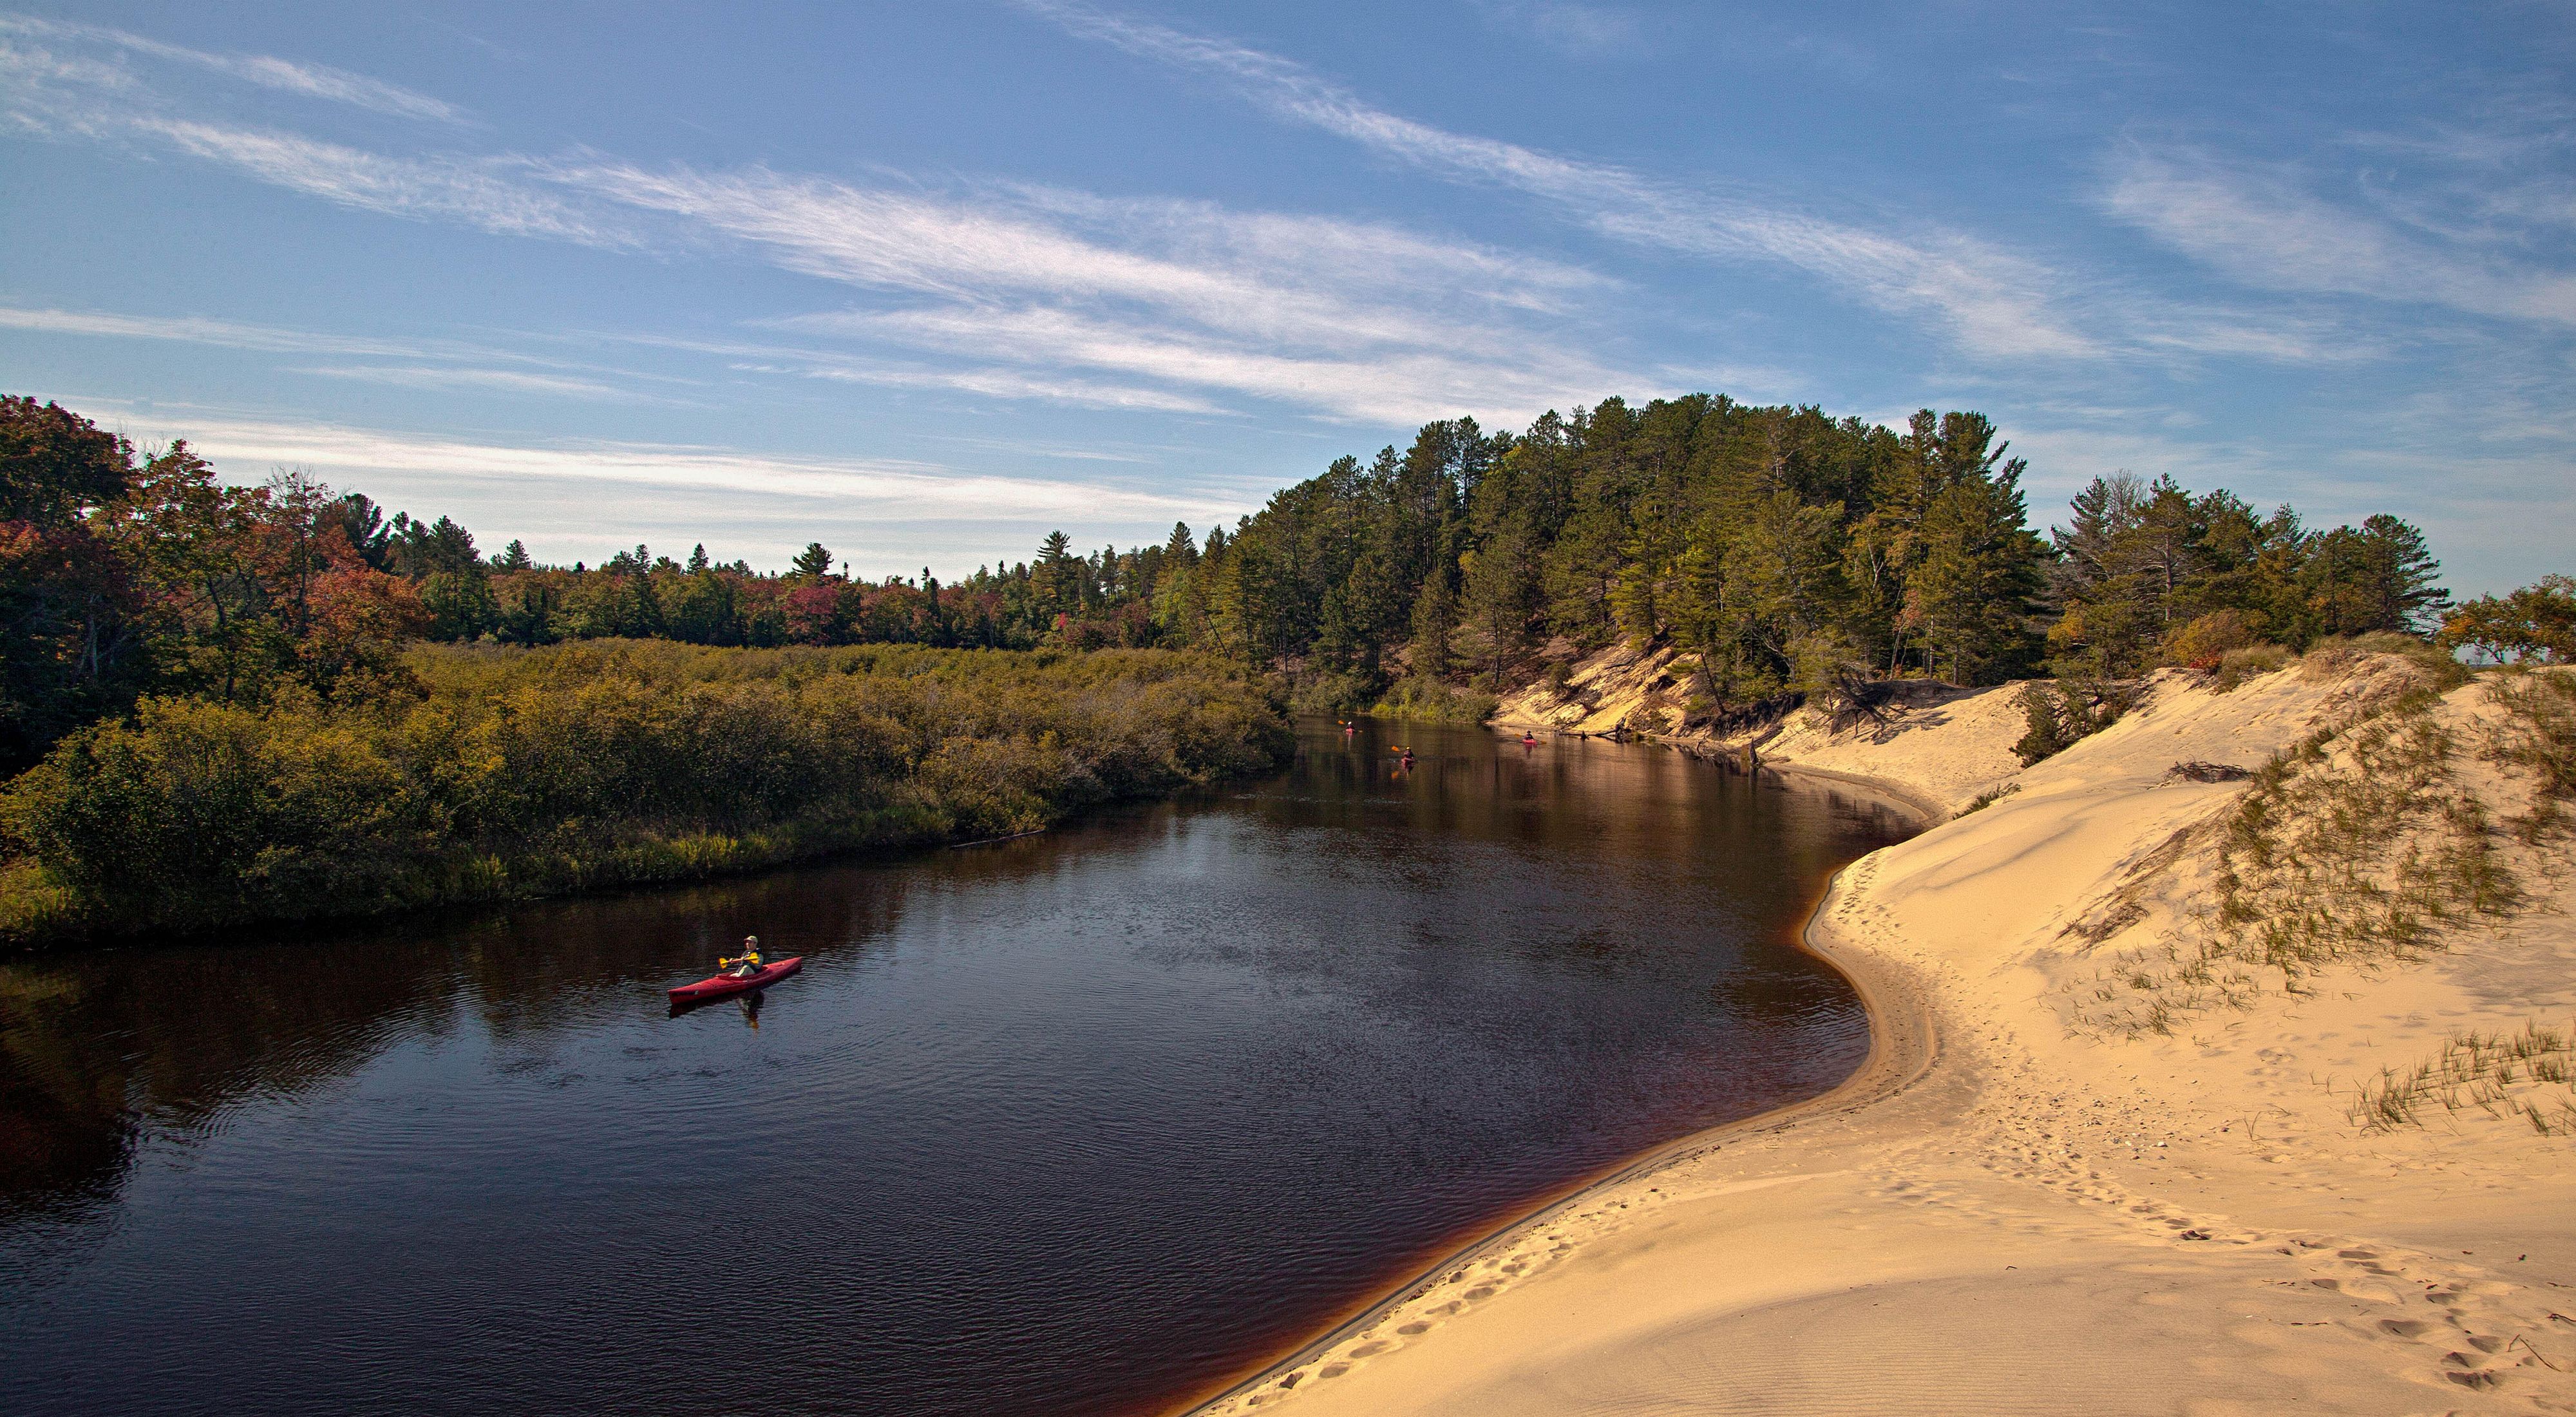 Kayakers paddle through the Two Hearted River. On the right is a sandy shore. On the left is a colorful forest of trees. 